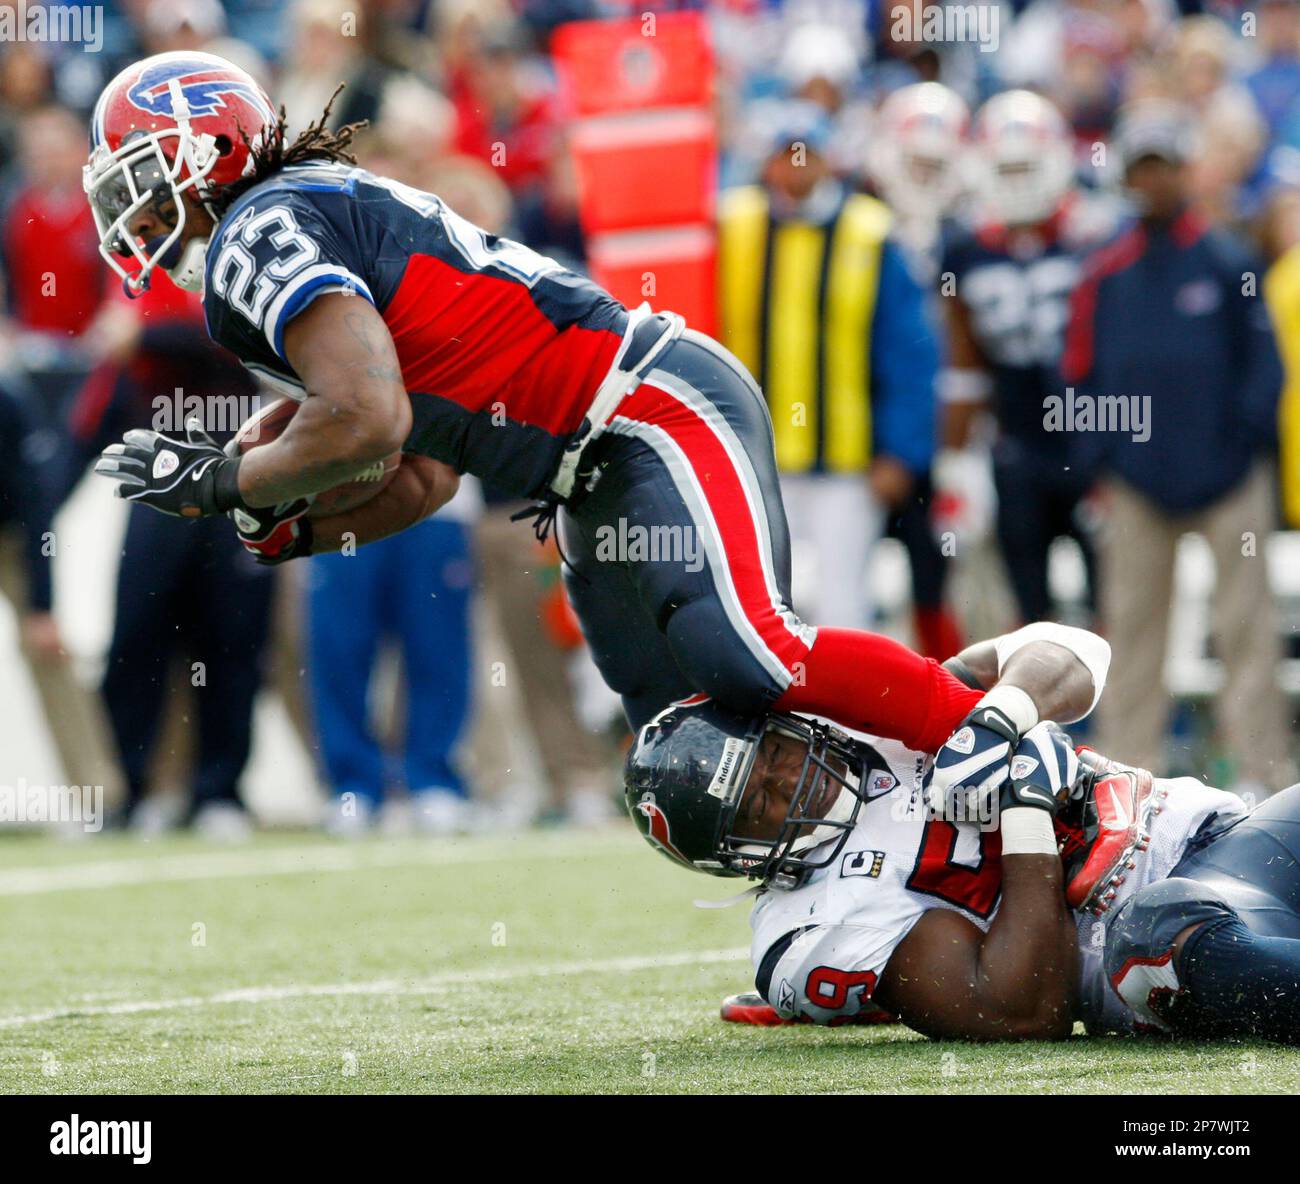 Buffalo Bills' Marshawn Lynch (23) is tackled by Houston Texans' DeMeco  Ryans (59) during the first